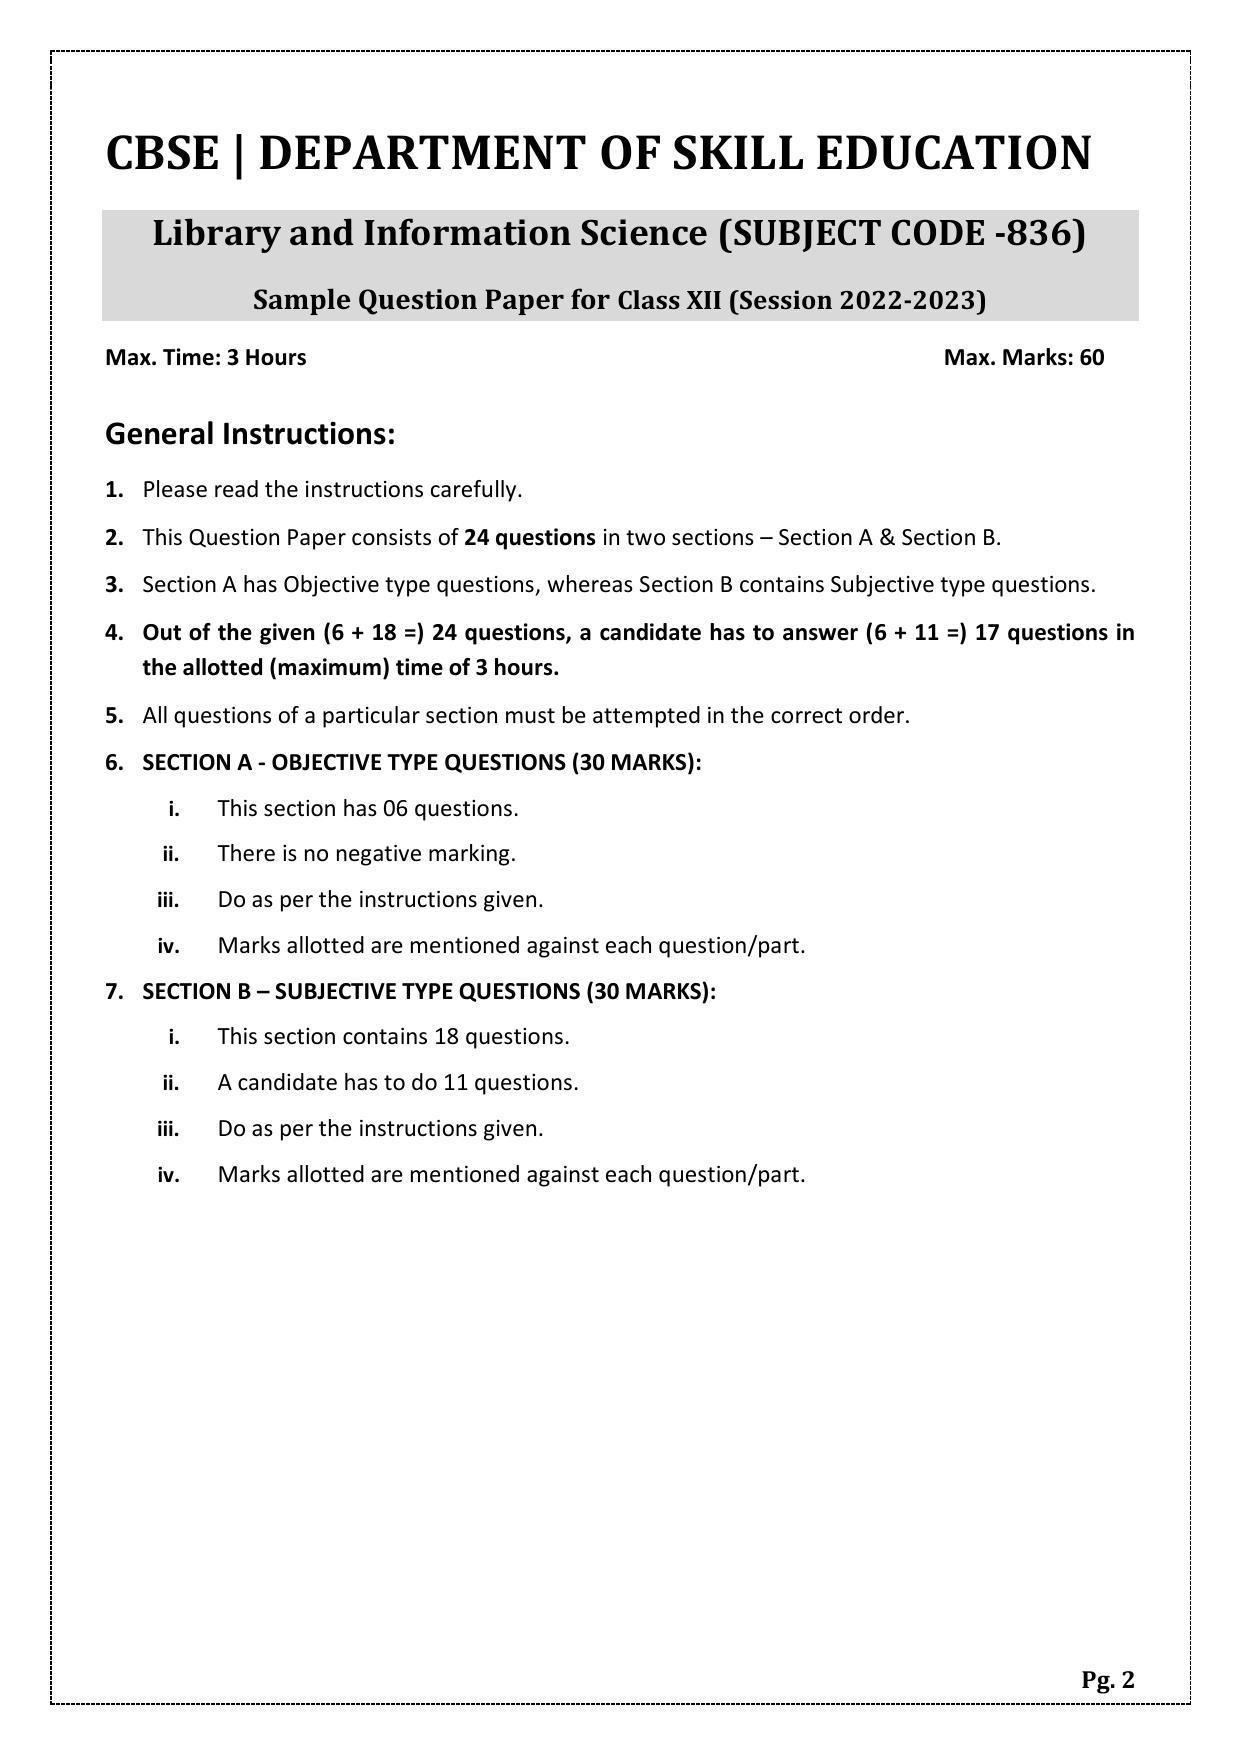 CBSE Class 10 Library & Information Science (Skill Education) Sample Papers 2023 - Page 2